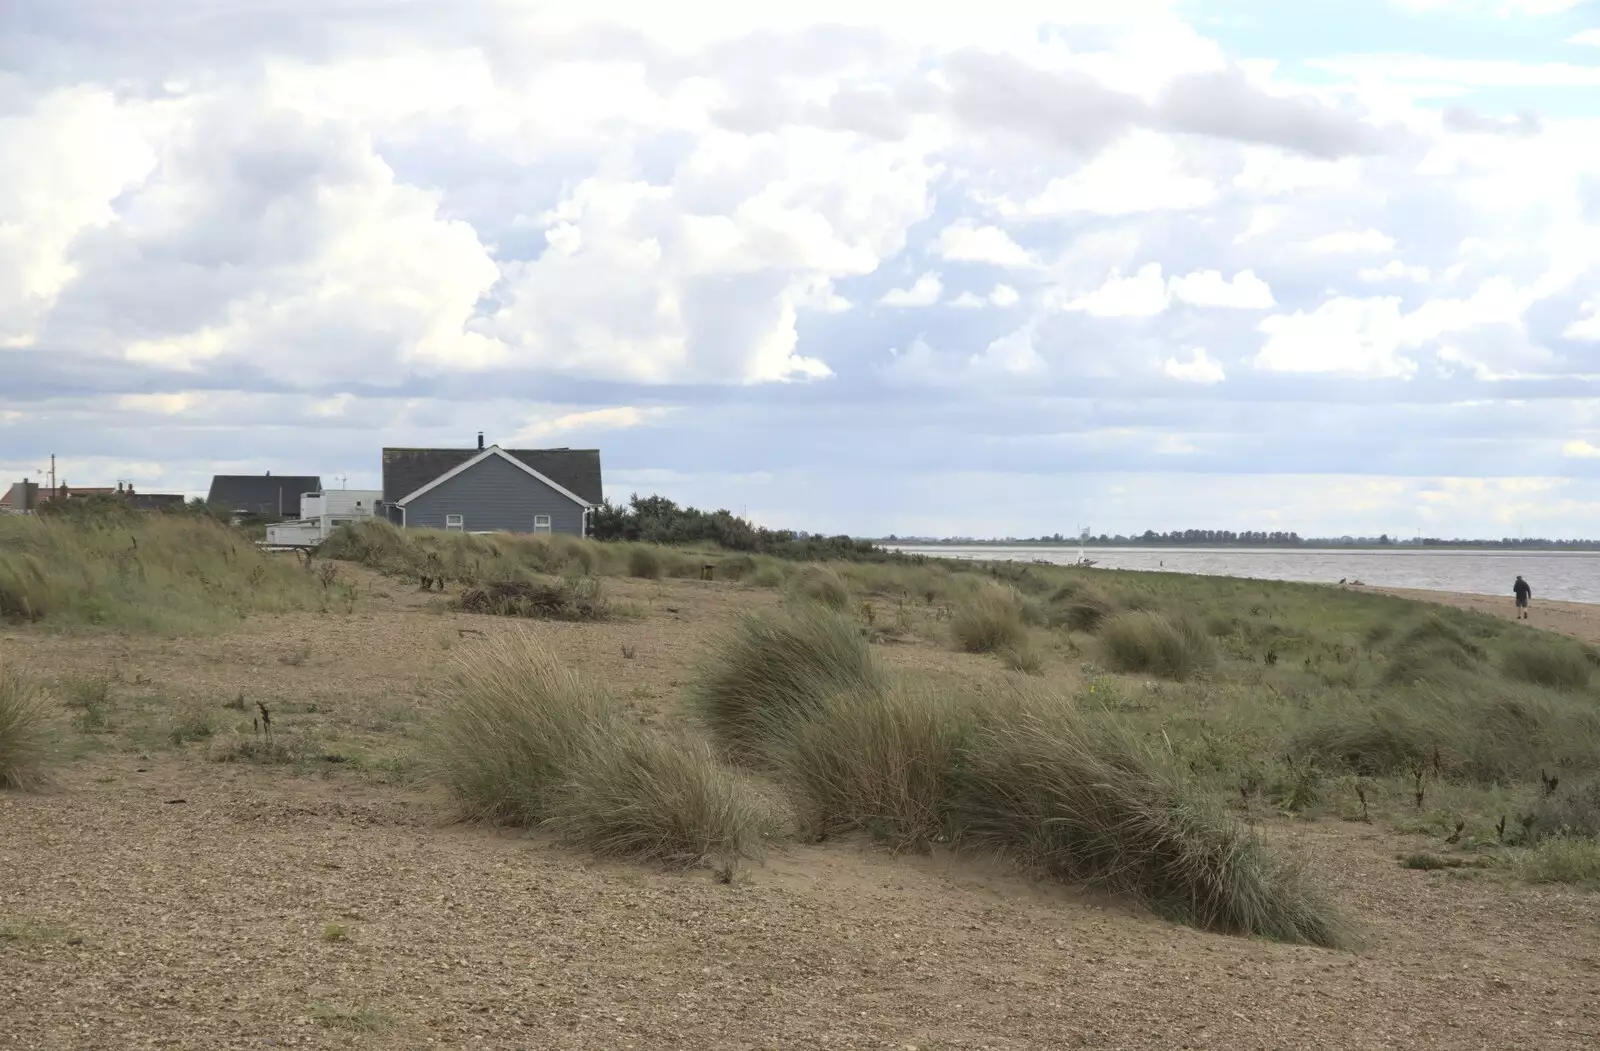 Wooden houses on the beach, from Camping on the Edge at Snettisham Beach, Norfolk - 28th August 2023